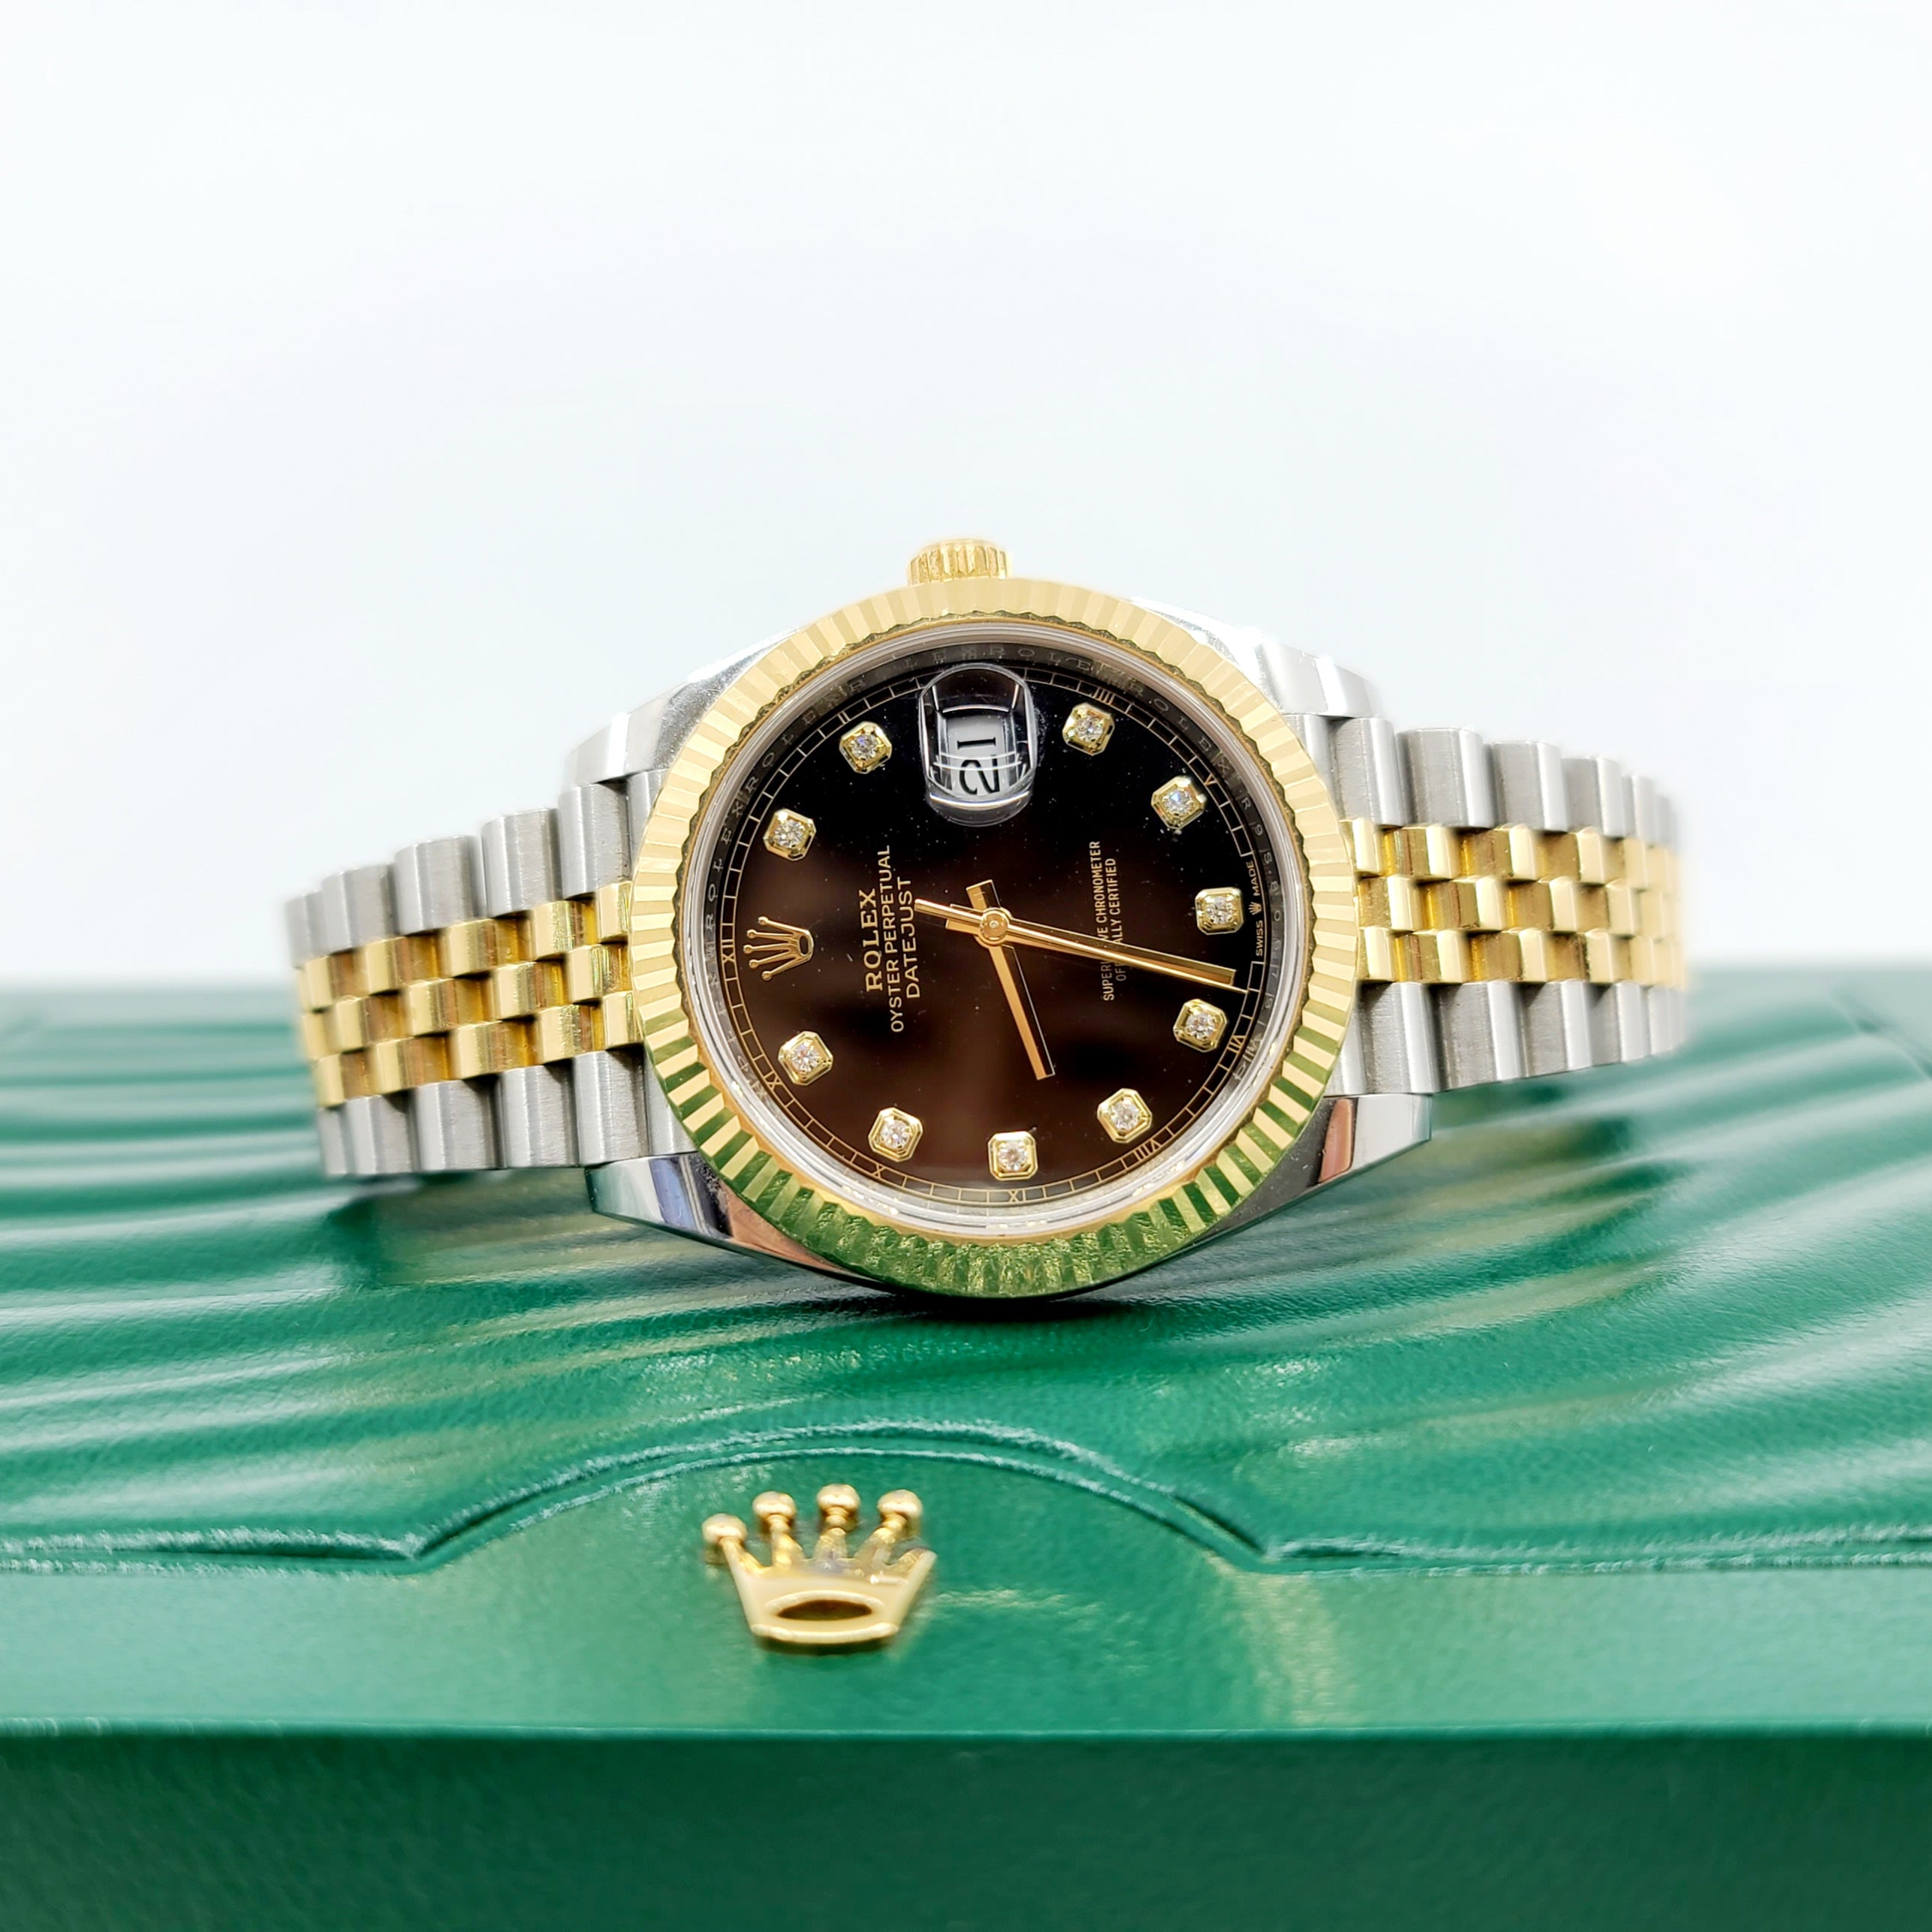 2020 Year Rolex Datejust 41 Jubliee Stainless Steel and Yellow Gold Black Diamond Dial Watch Model 126333 Rolex official price $14,850 + tax